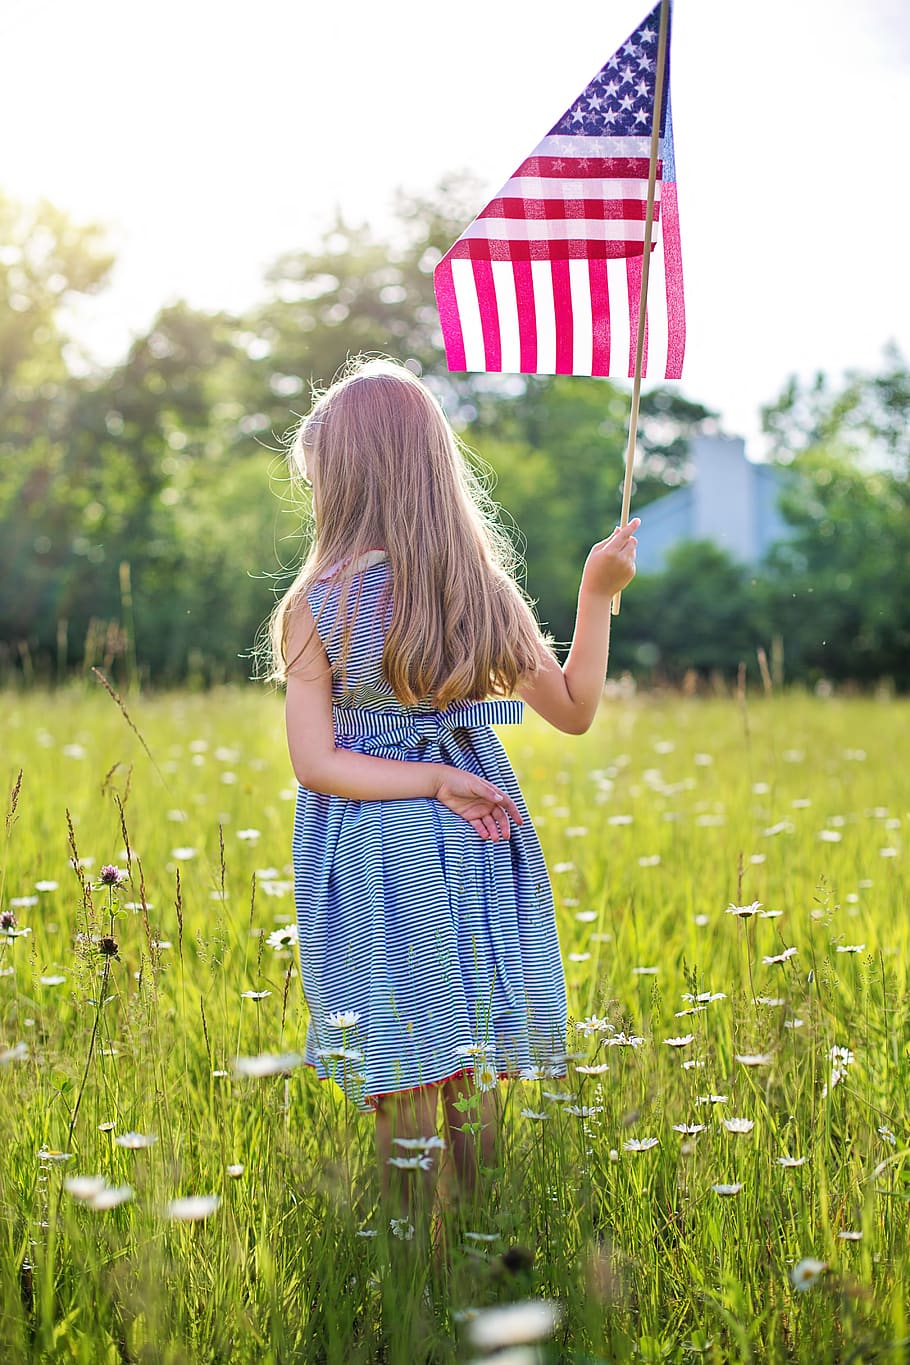 fourth of july, 4th of july, independence day, independence, flag, little girl, celebration, usa, america, holiday